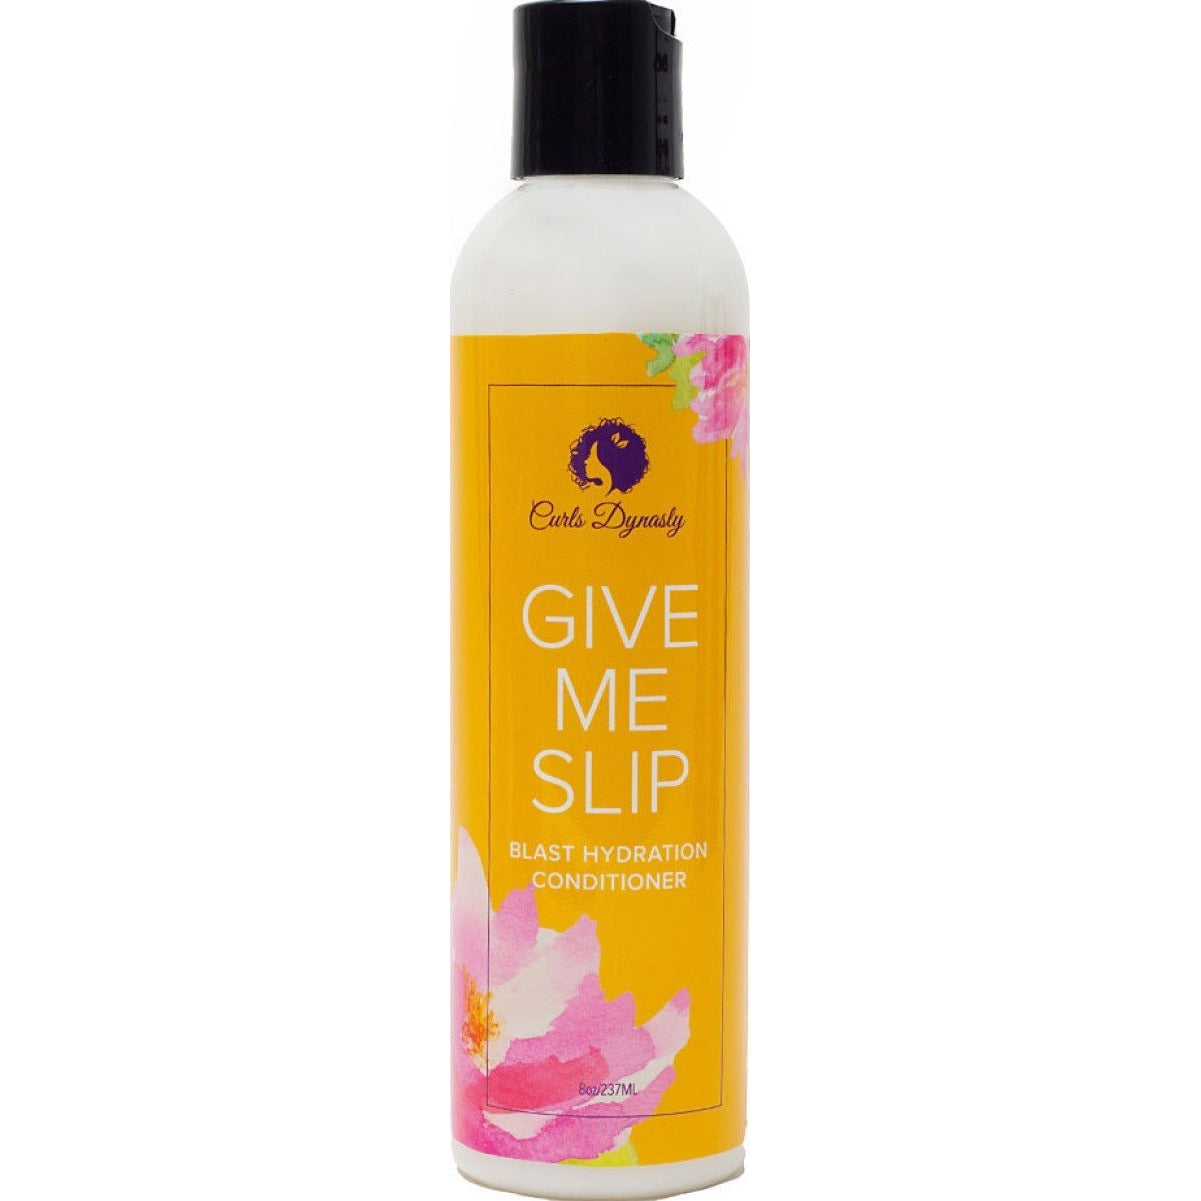 4th Ave Market: CURLS Give Me Slip Blast Hydration Conditioner